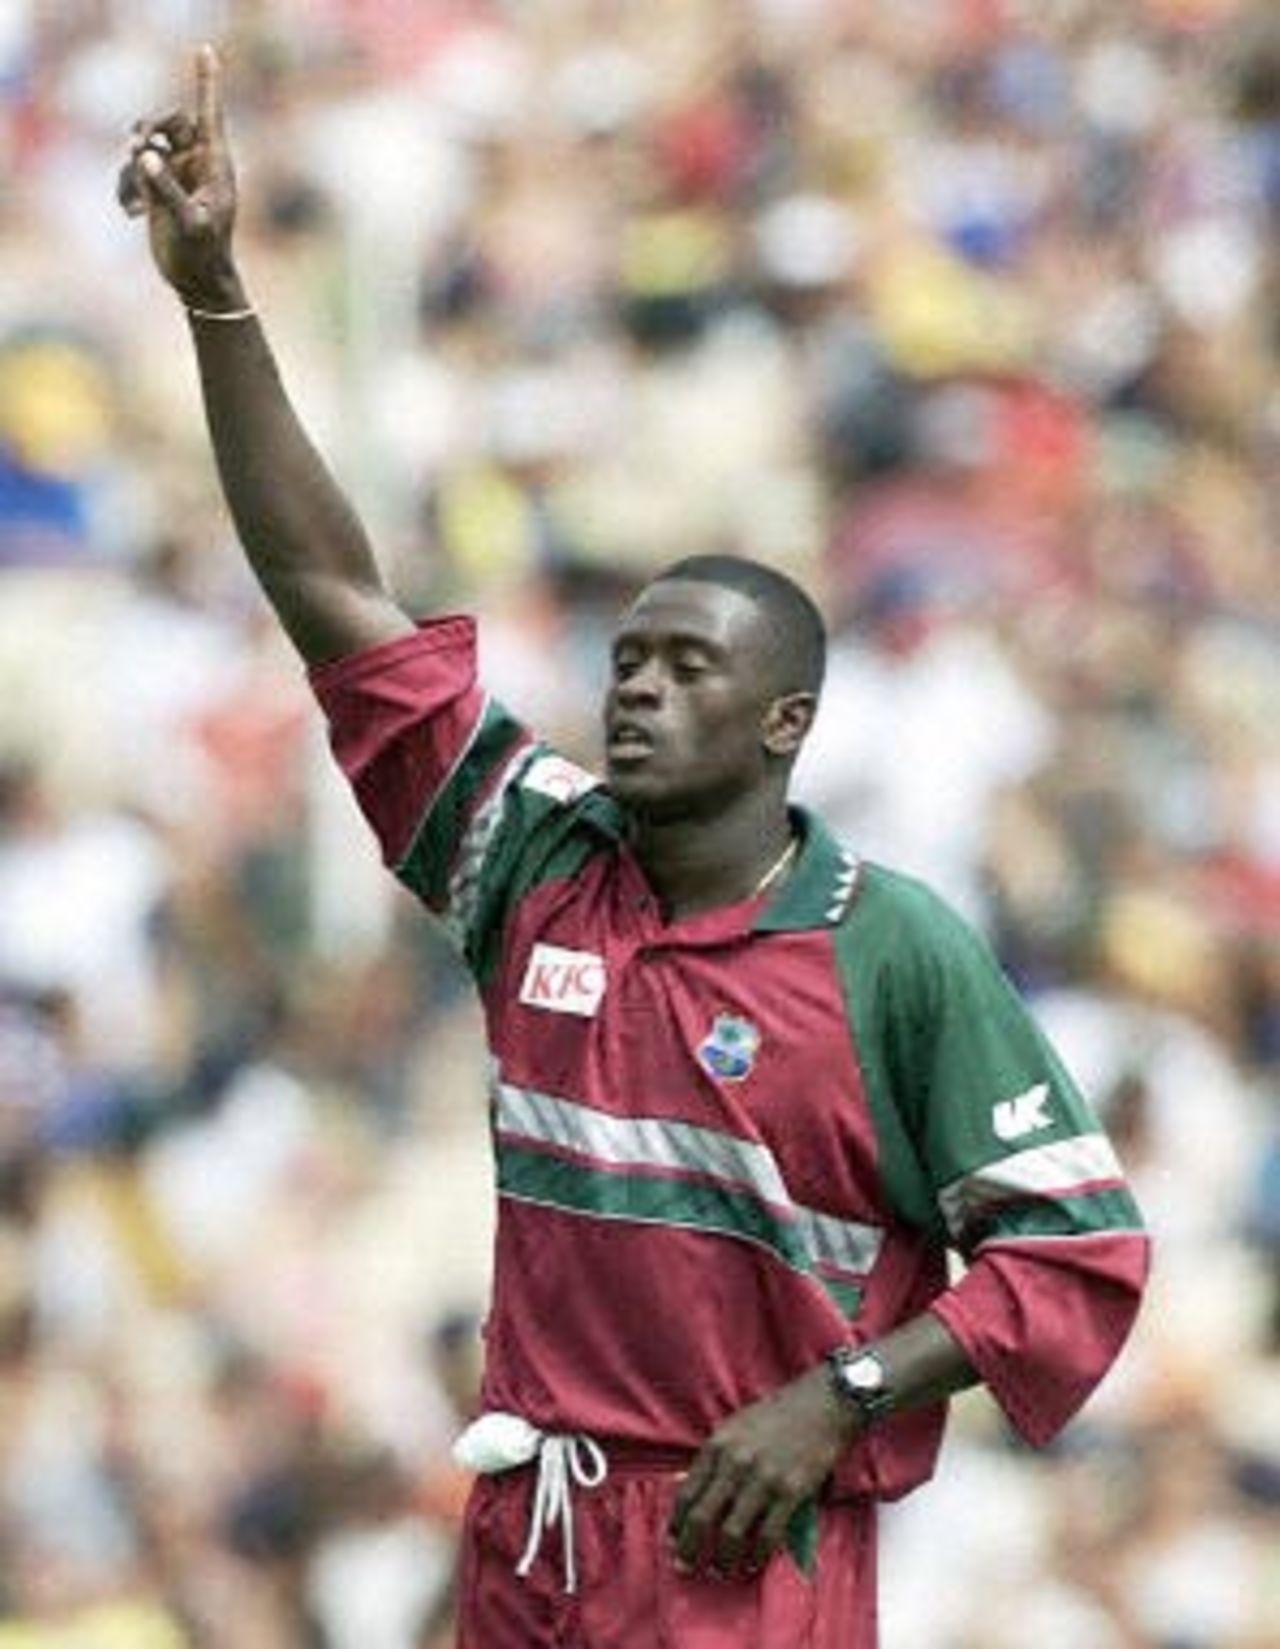 West Indies fast bowler Cameron Cuffy celebrates after taking the wicket of Mark Waugh for 10 runs during the first cricket final between Australia and the West Indies in Sydney 07 February 2001. The West Indies won the toss and put Australia in to bat, Waugh was caught by Brian Lara.